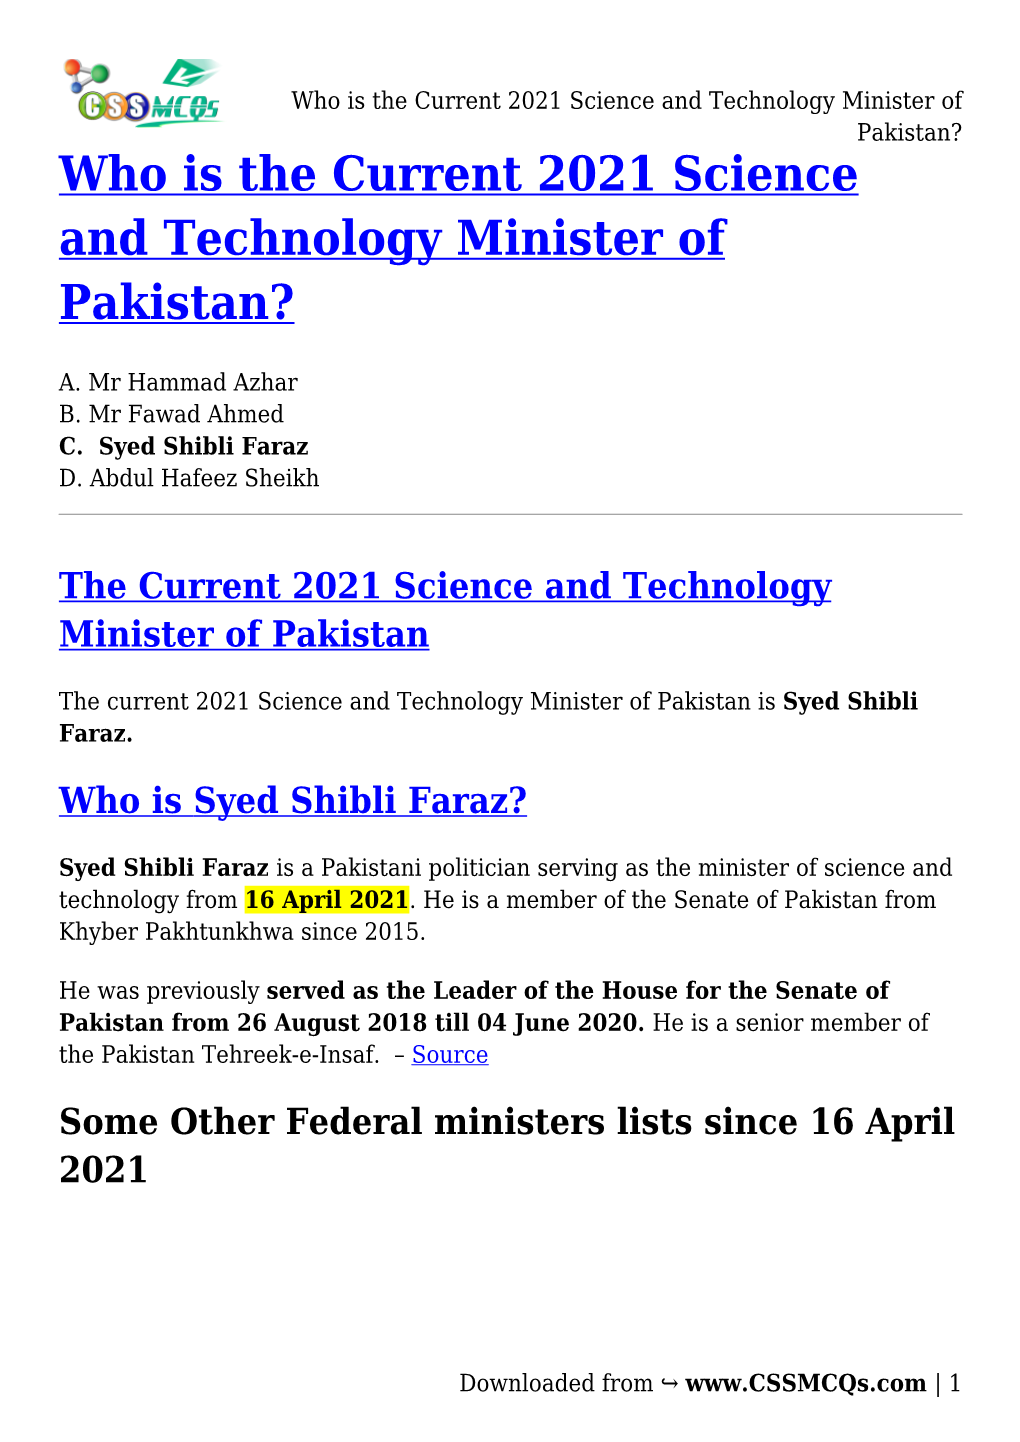 Who Is the Current 2021 Science and Technology Minister of Pakistan? Who Is the Current 2021 Science and Technology Minister of Pakistan?